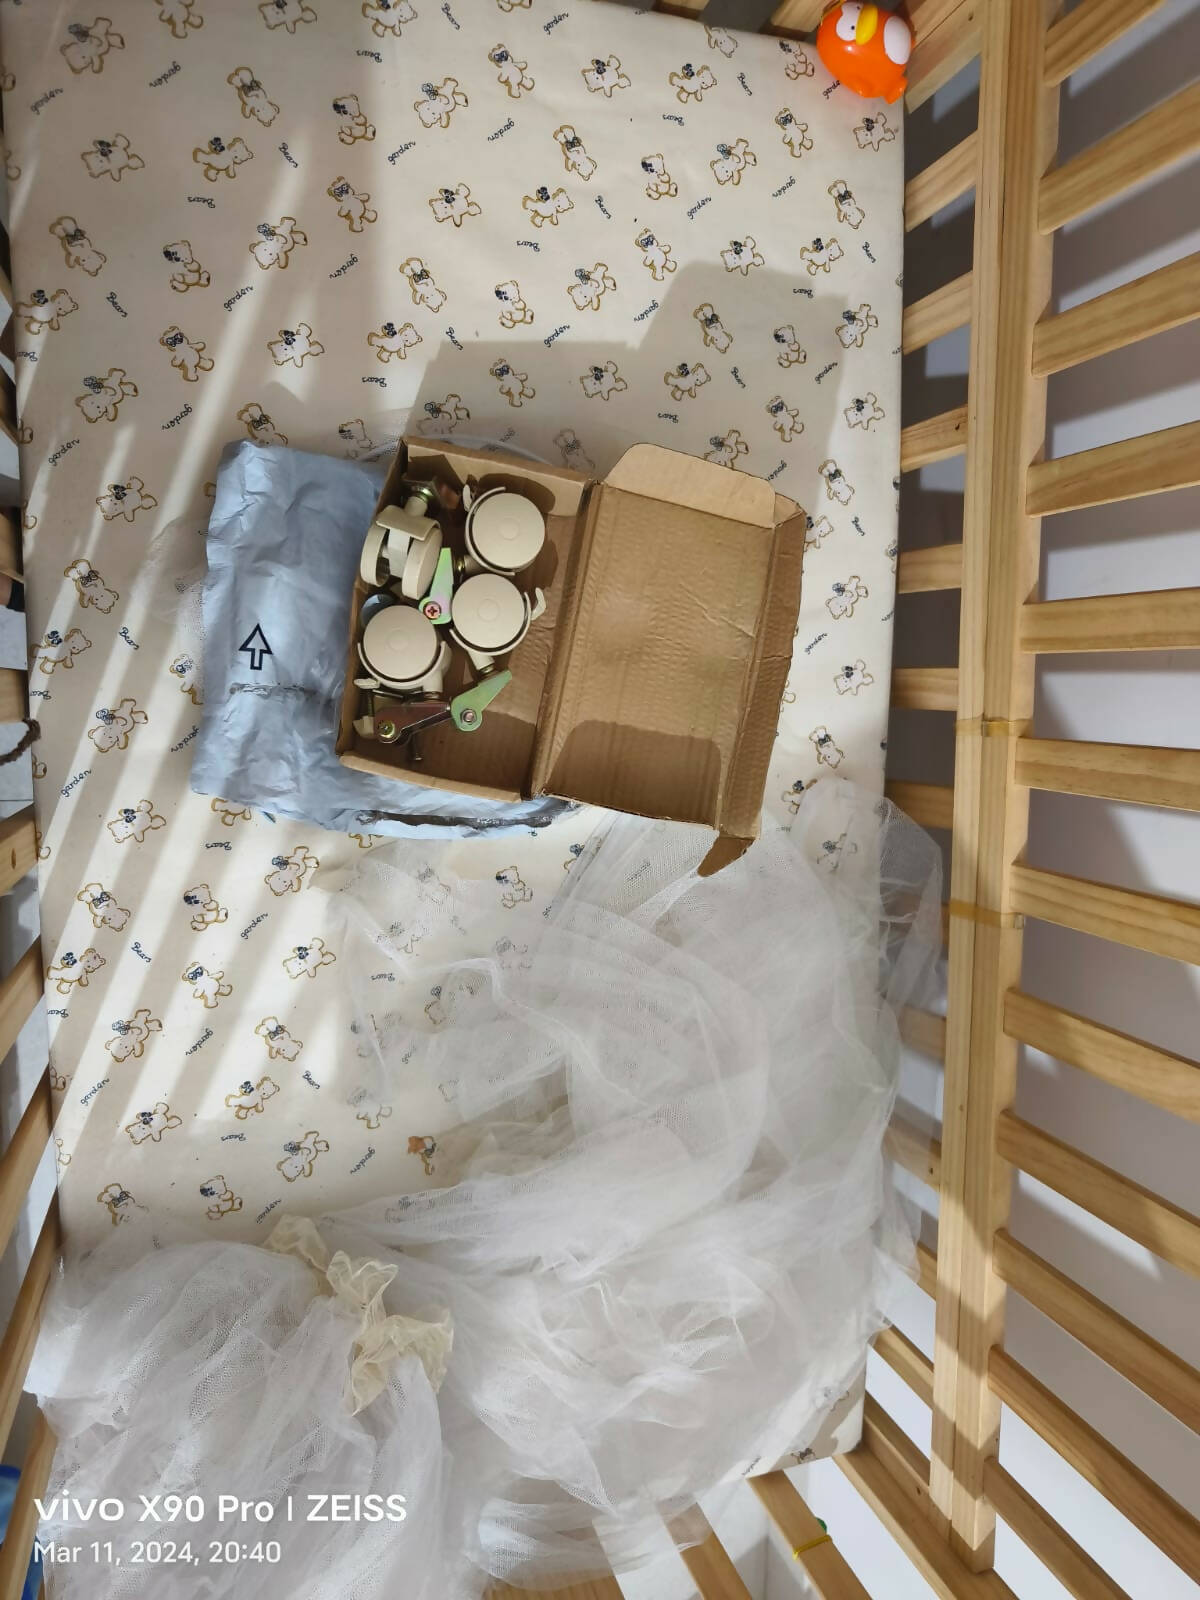 Create a cozy haven for your baby with the LUVLAP C70 Cot/Crib - safety, comfort, and style in one!